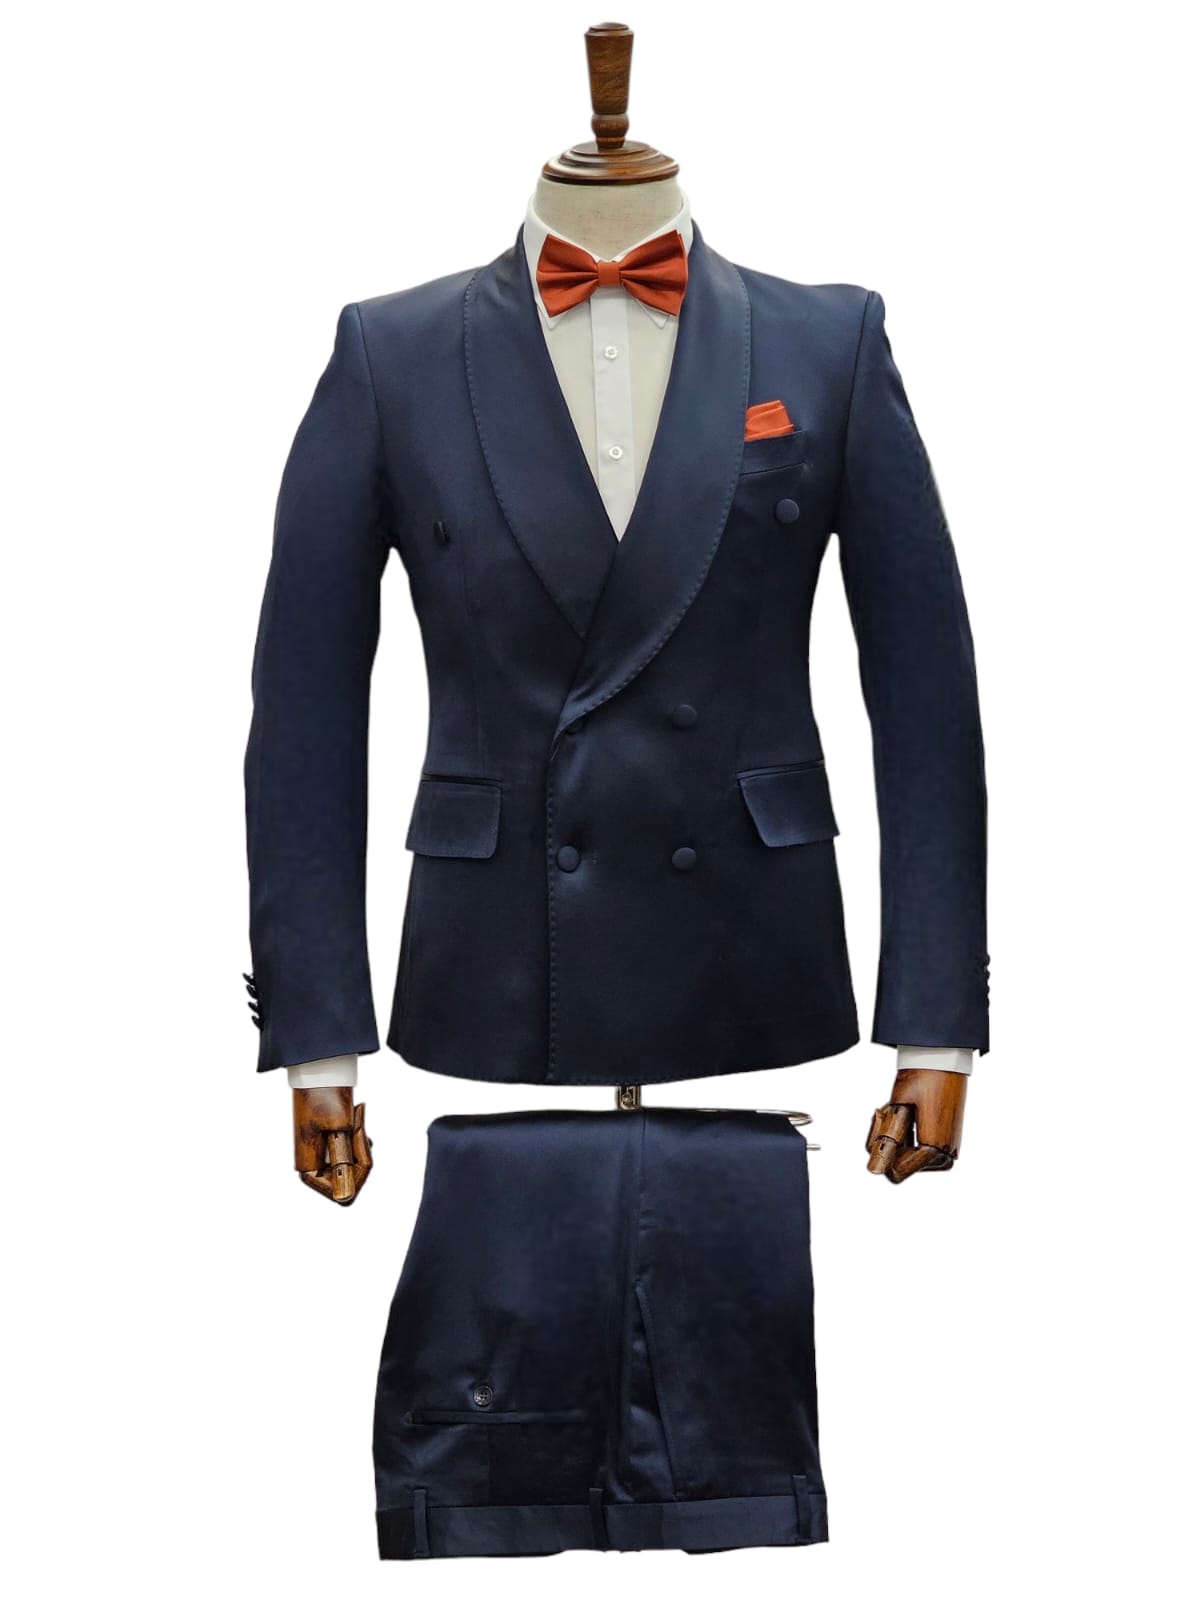 Navy Slim Fit 6-Button Suit by KCT Menswear.